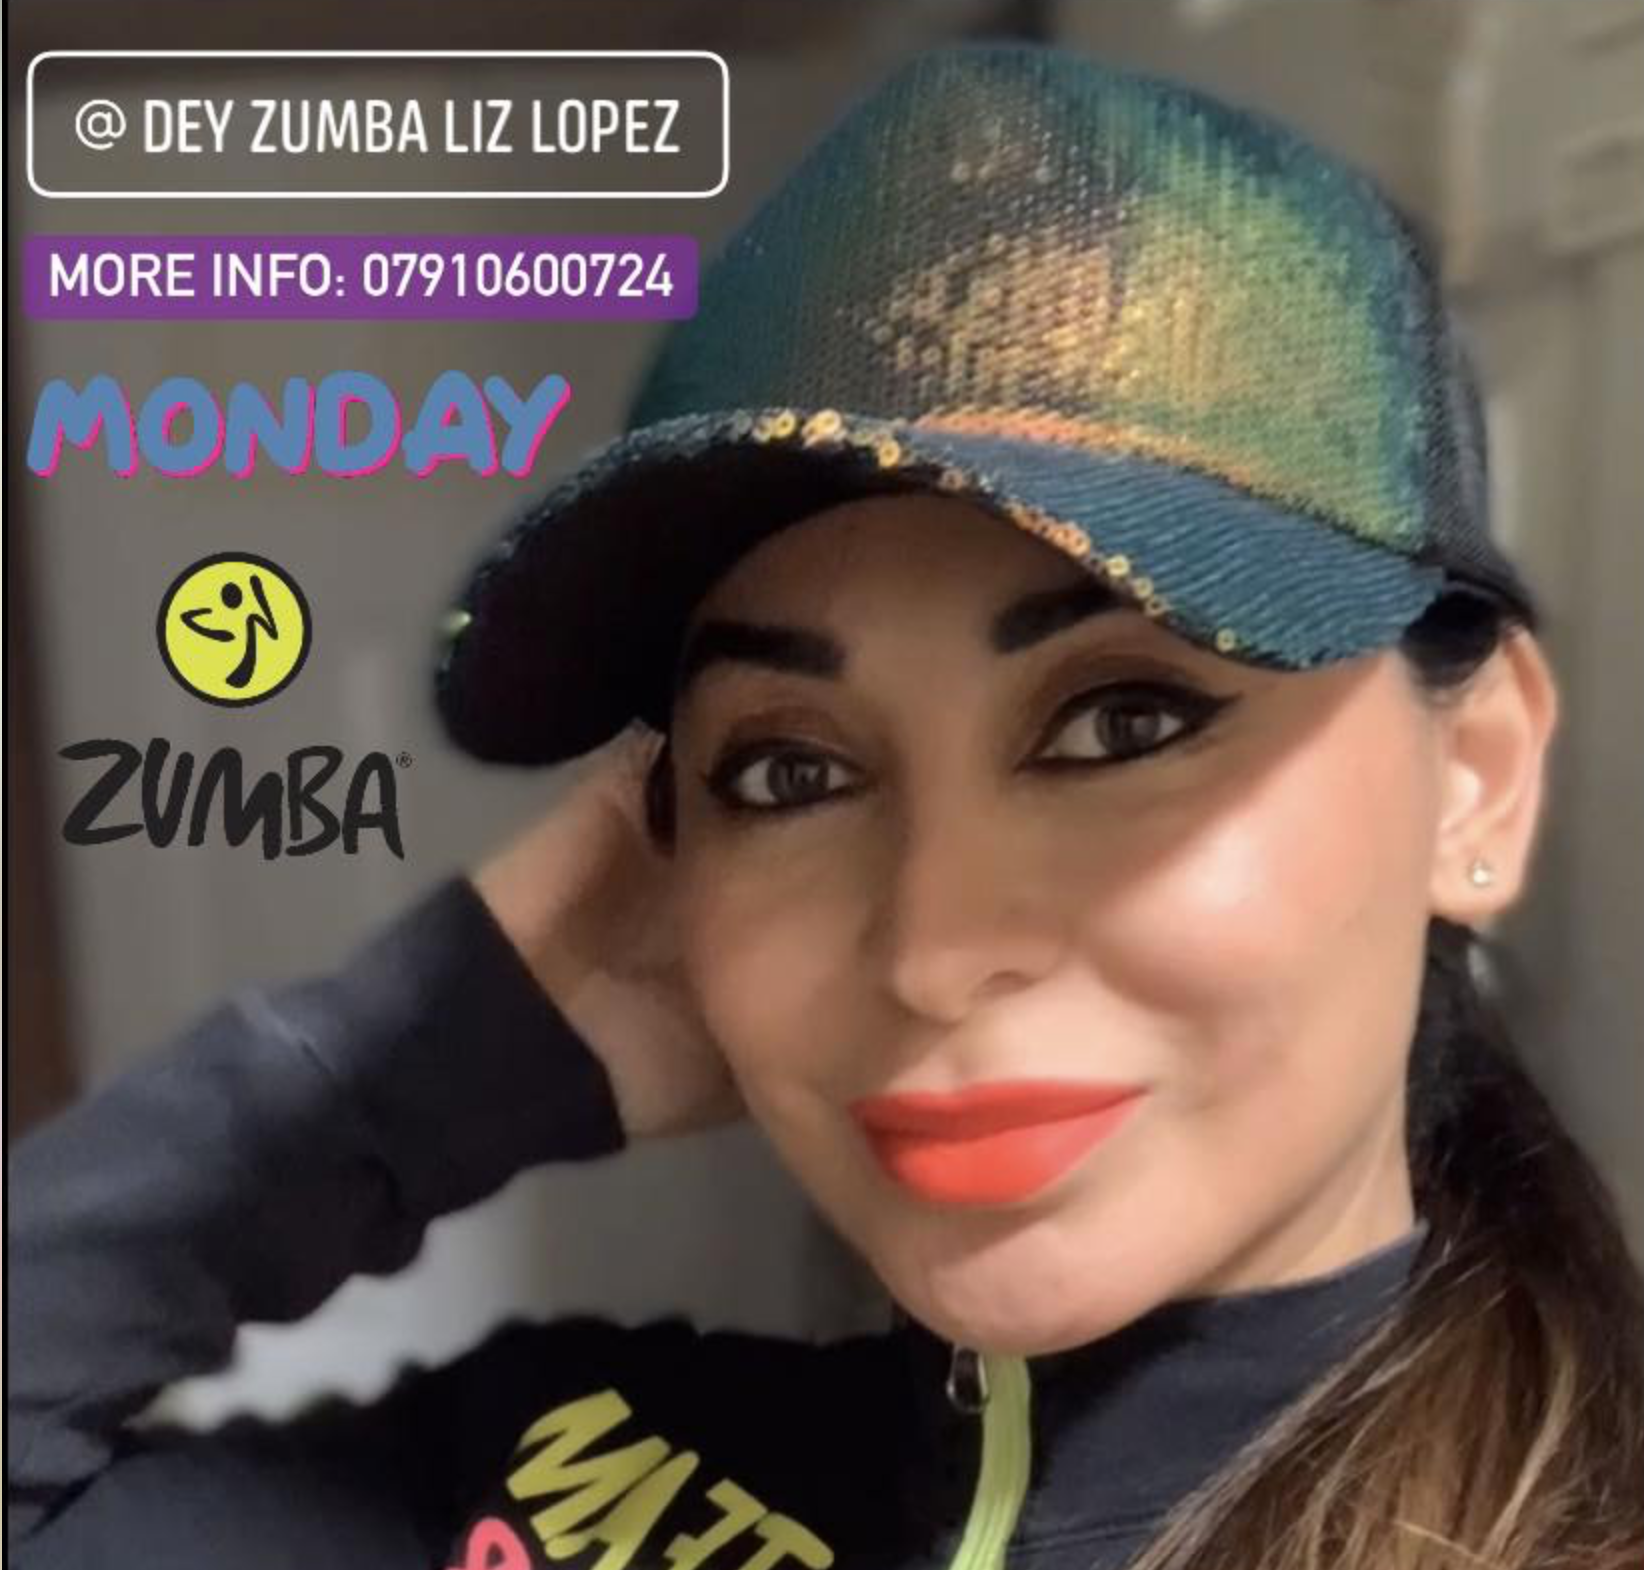 Mexican roots inspire Zumba classes